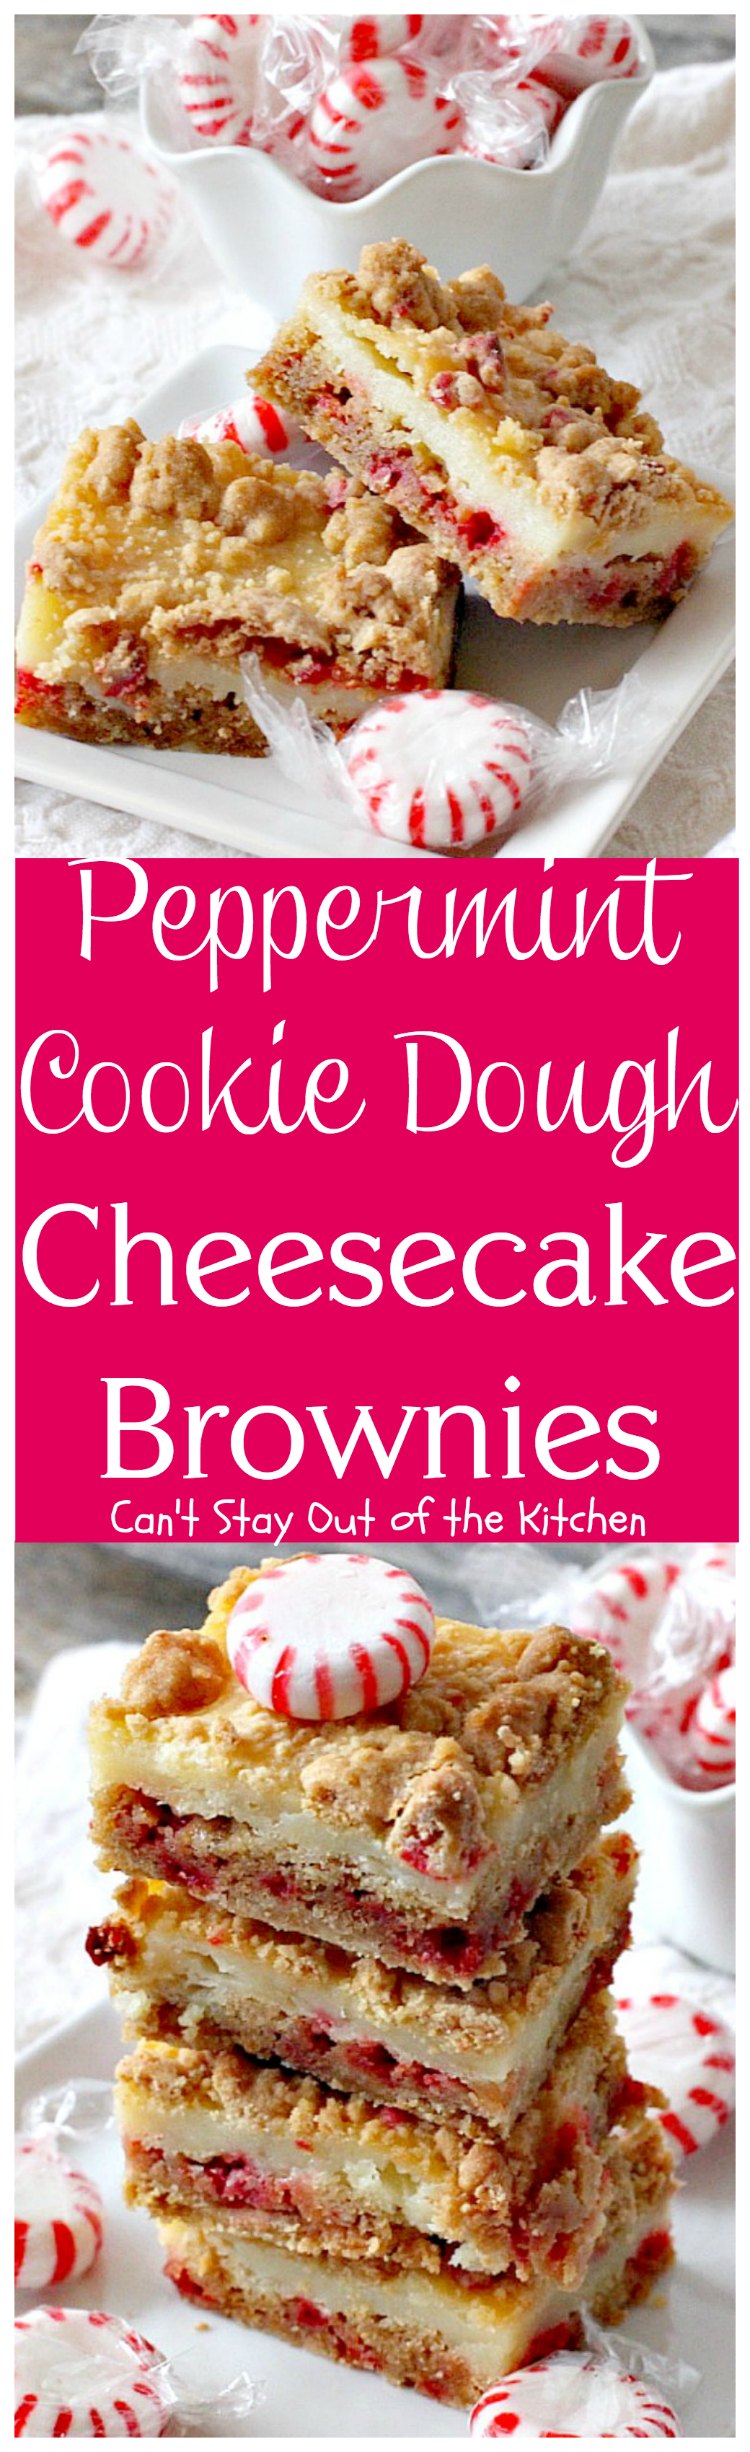 Peppermint Cookie Dough Cheesecake Brownies | Can't Stay Out of the Kitchen